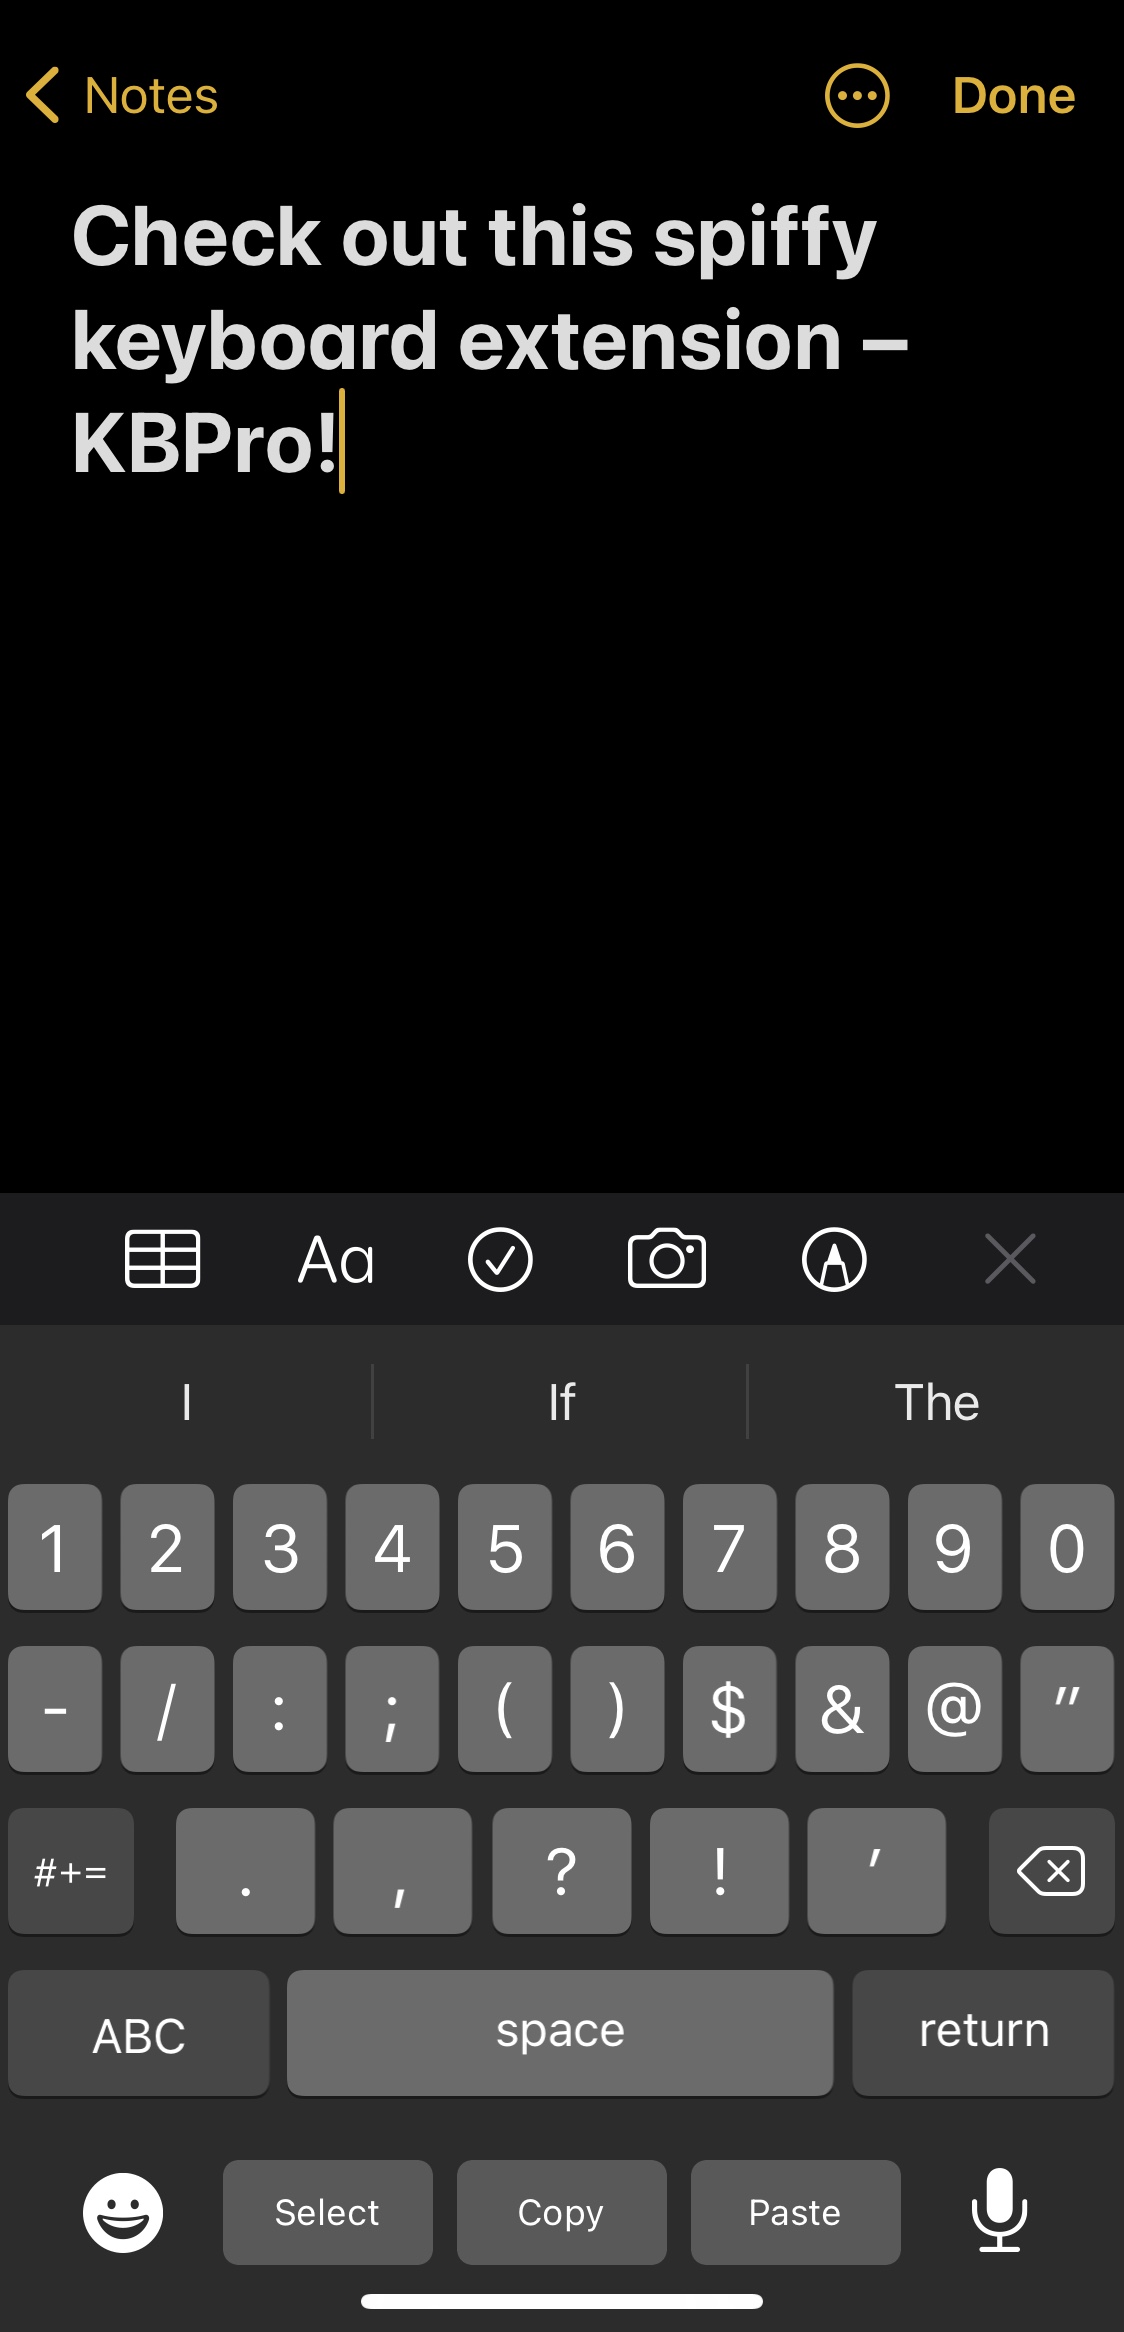 KBPro adds shortcuts and UI customization to the iOS keyboard.